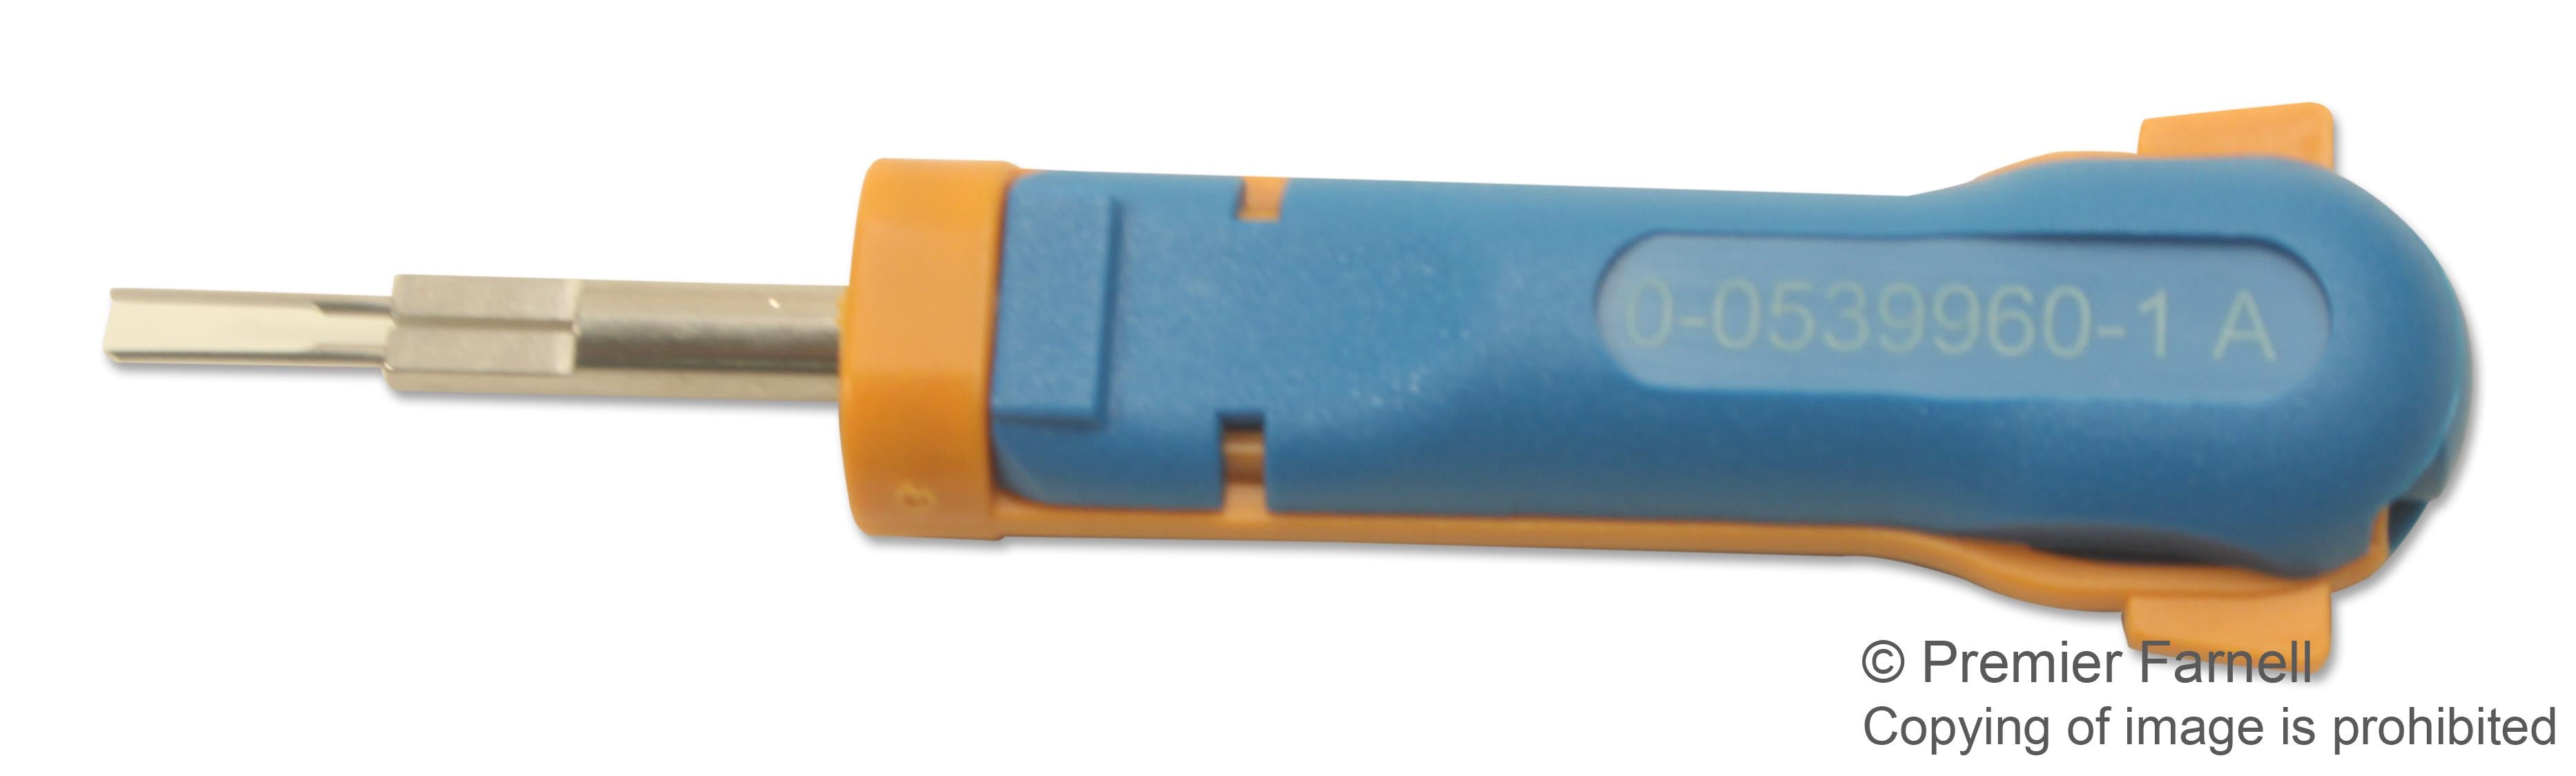 0-0539960-1 EXTRACTION TOOL, RCPT & TAB CONTACT AMP - TE CONNECTIVITY